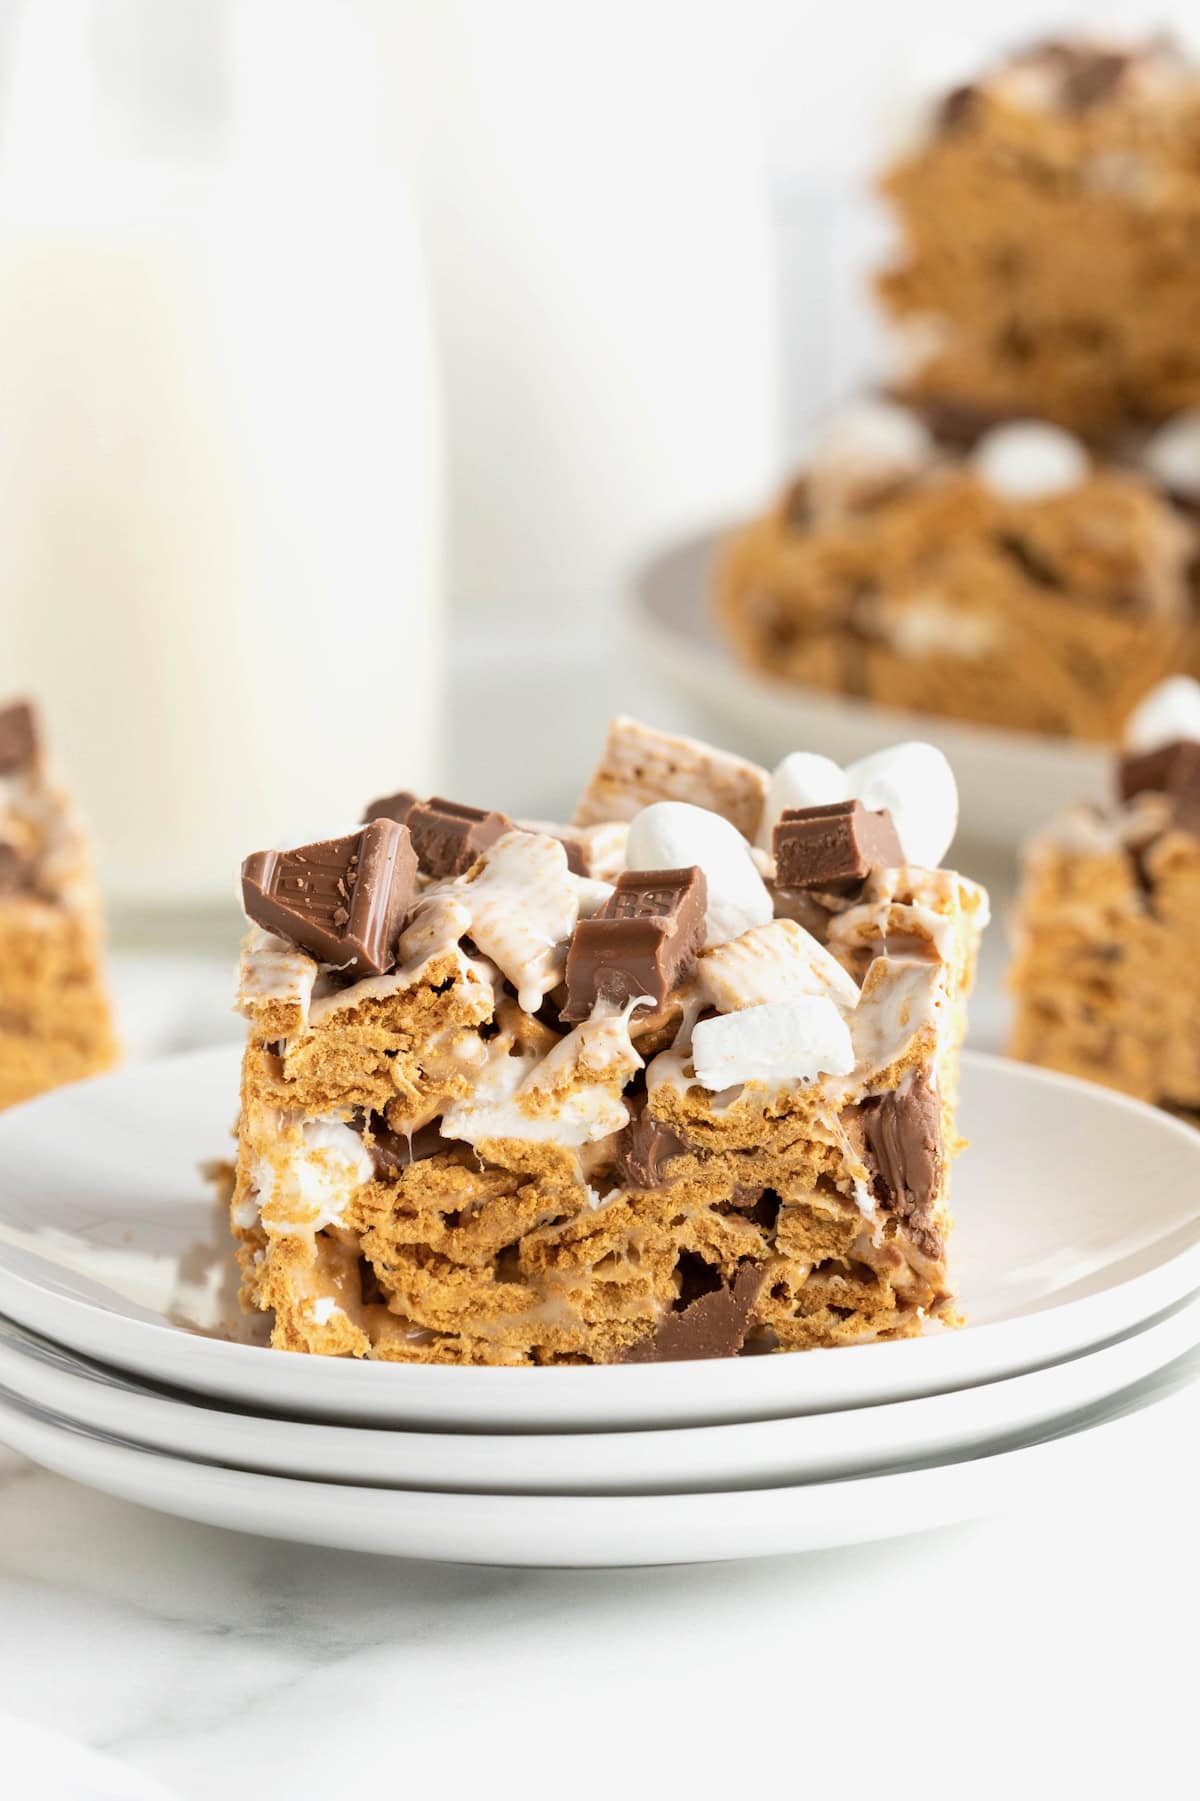 A no-bake s'mores bar on a stack of three white dessert plates.